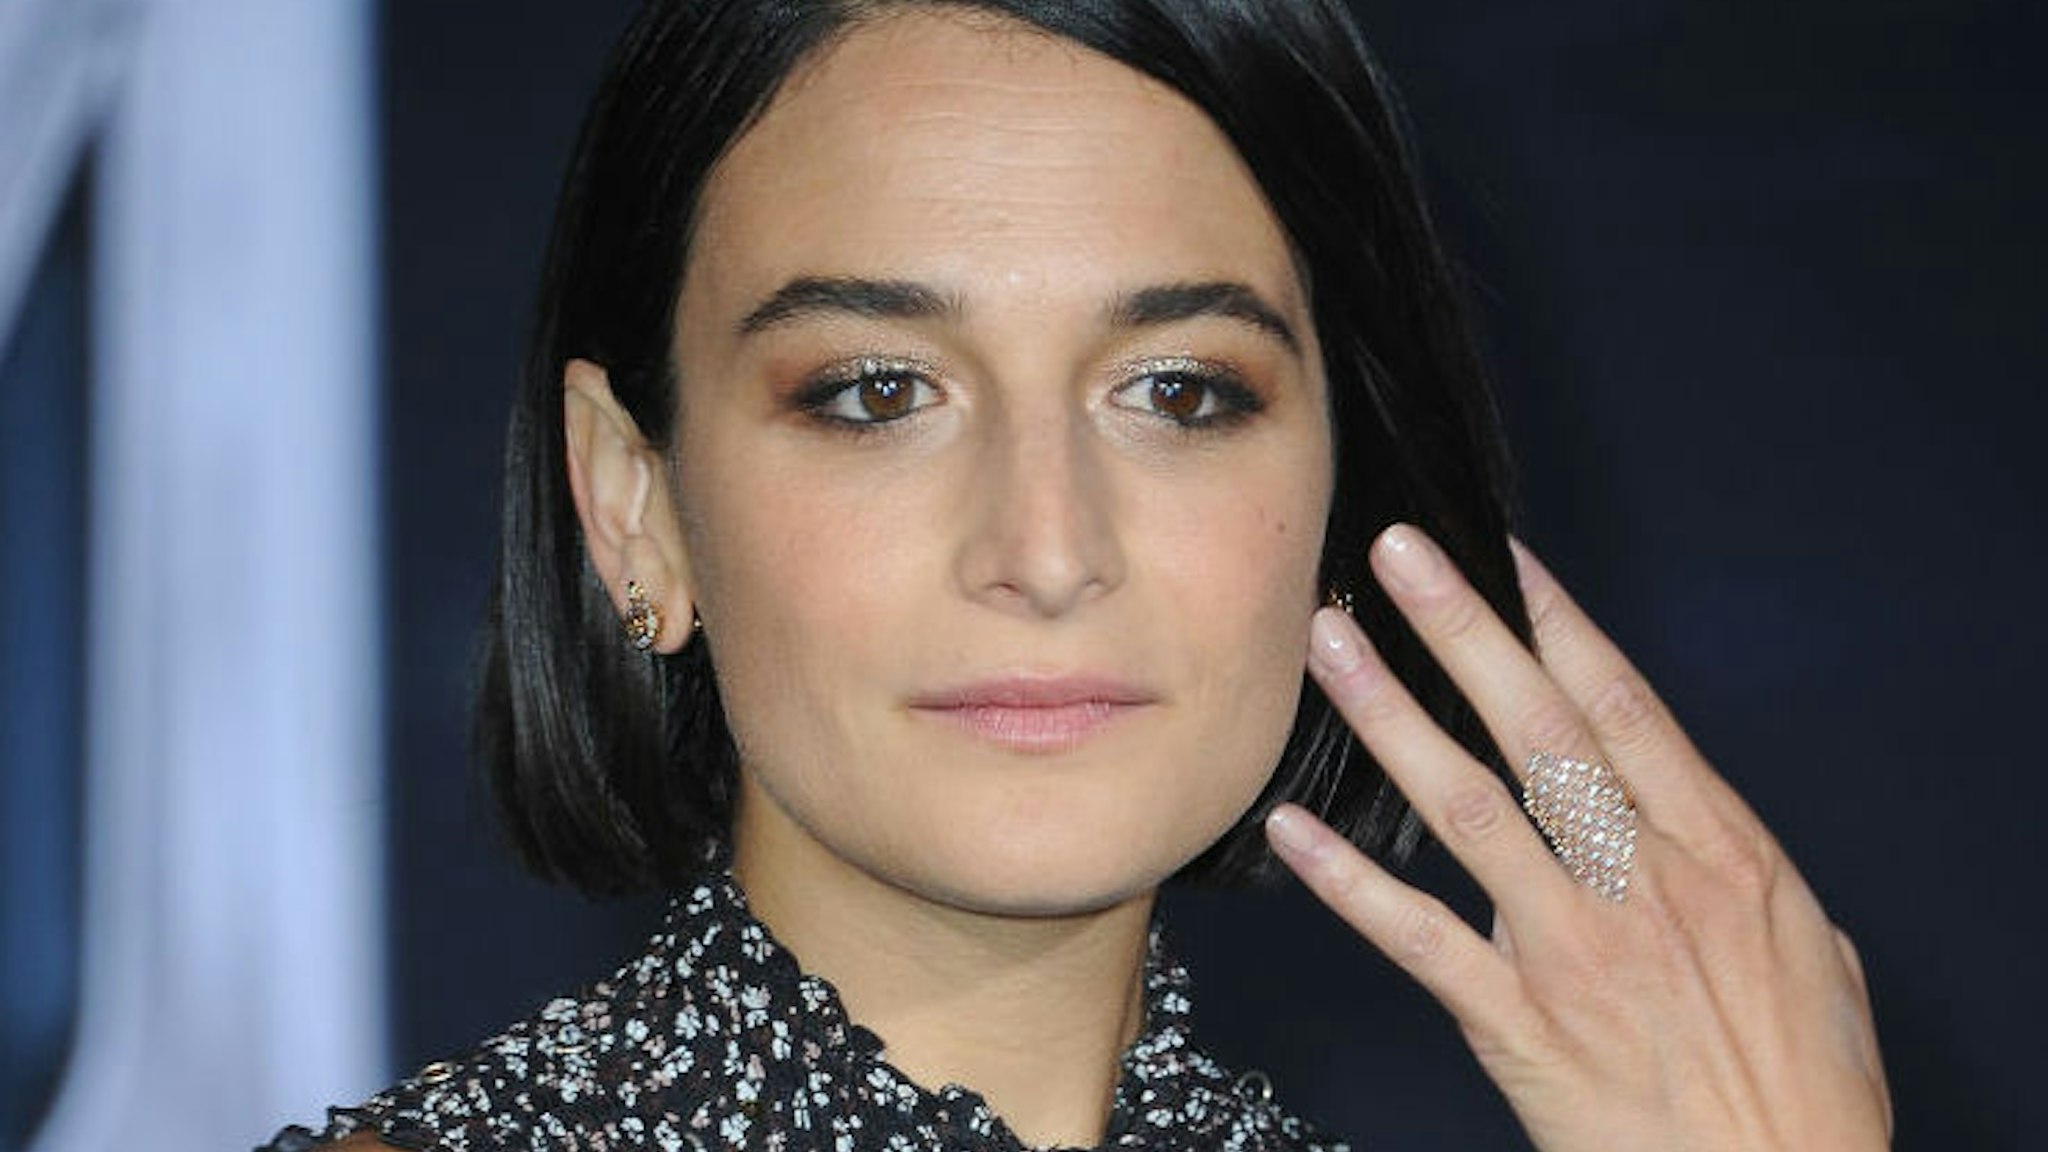 Actress Jenny Slate arrives for Premiere Of Columbia Pictures' "Venom" held at Regency Village Theatre on October 1, 2018 in Westwood, California.